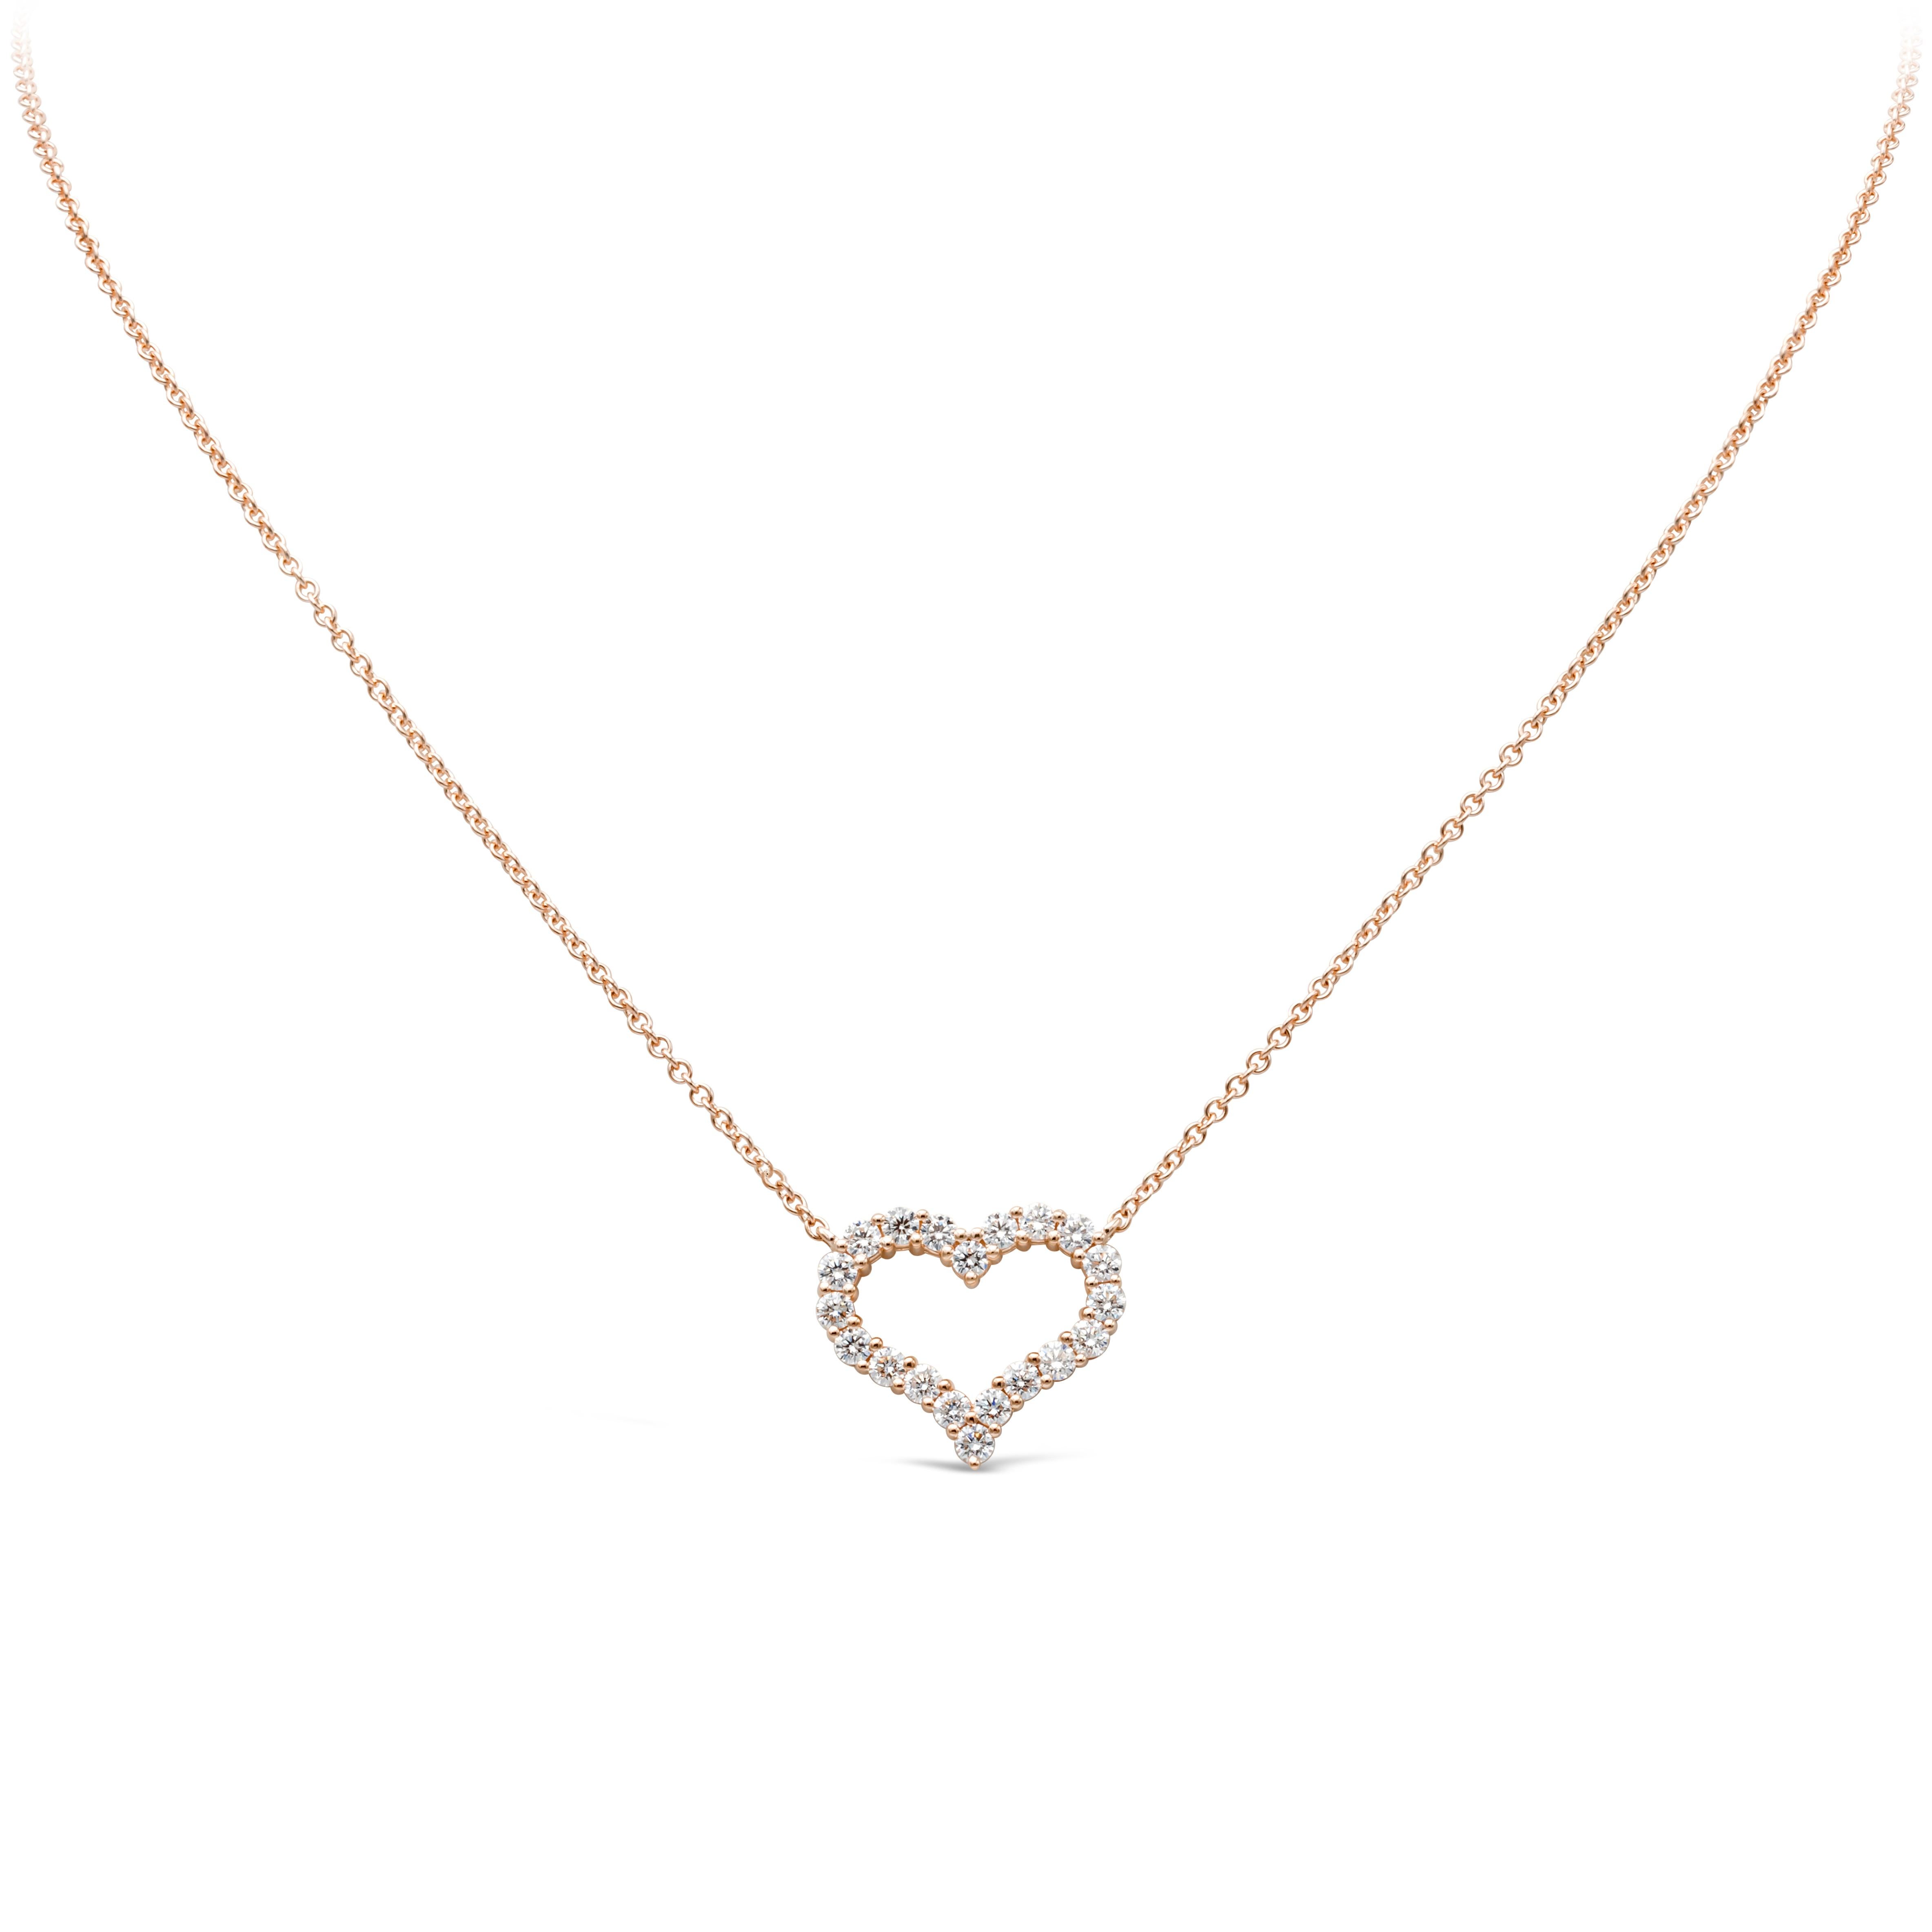 A simple and unique pendant necklace showcasing a row of round brilliant diamonds weighing 1.13 carats total, F color and VS/SI1 in clarity. Set in an open-work heart shape mounting made in 14K rose gold and shared prong setting. Suspended on an